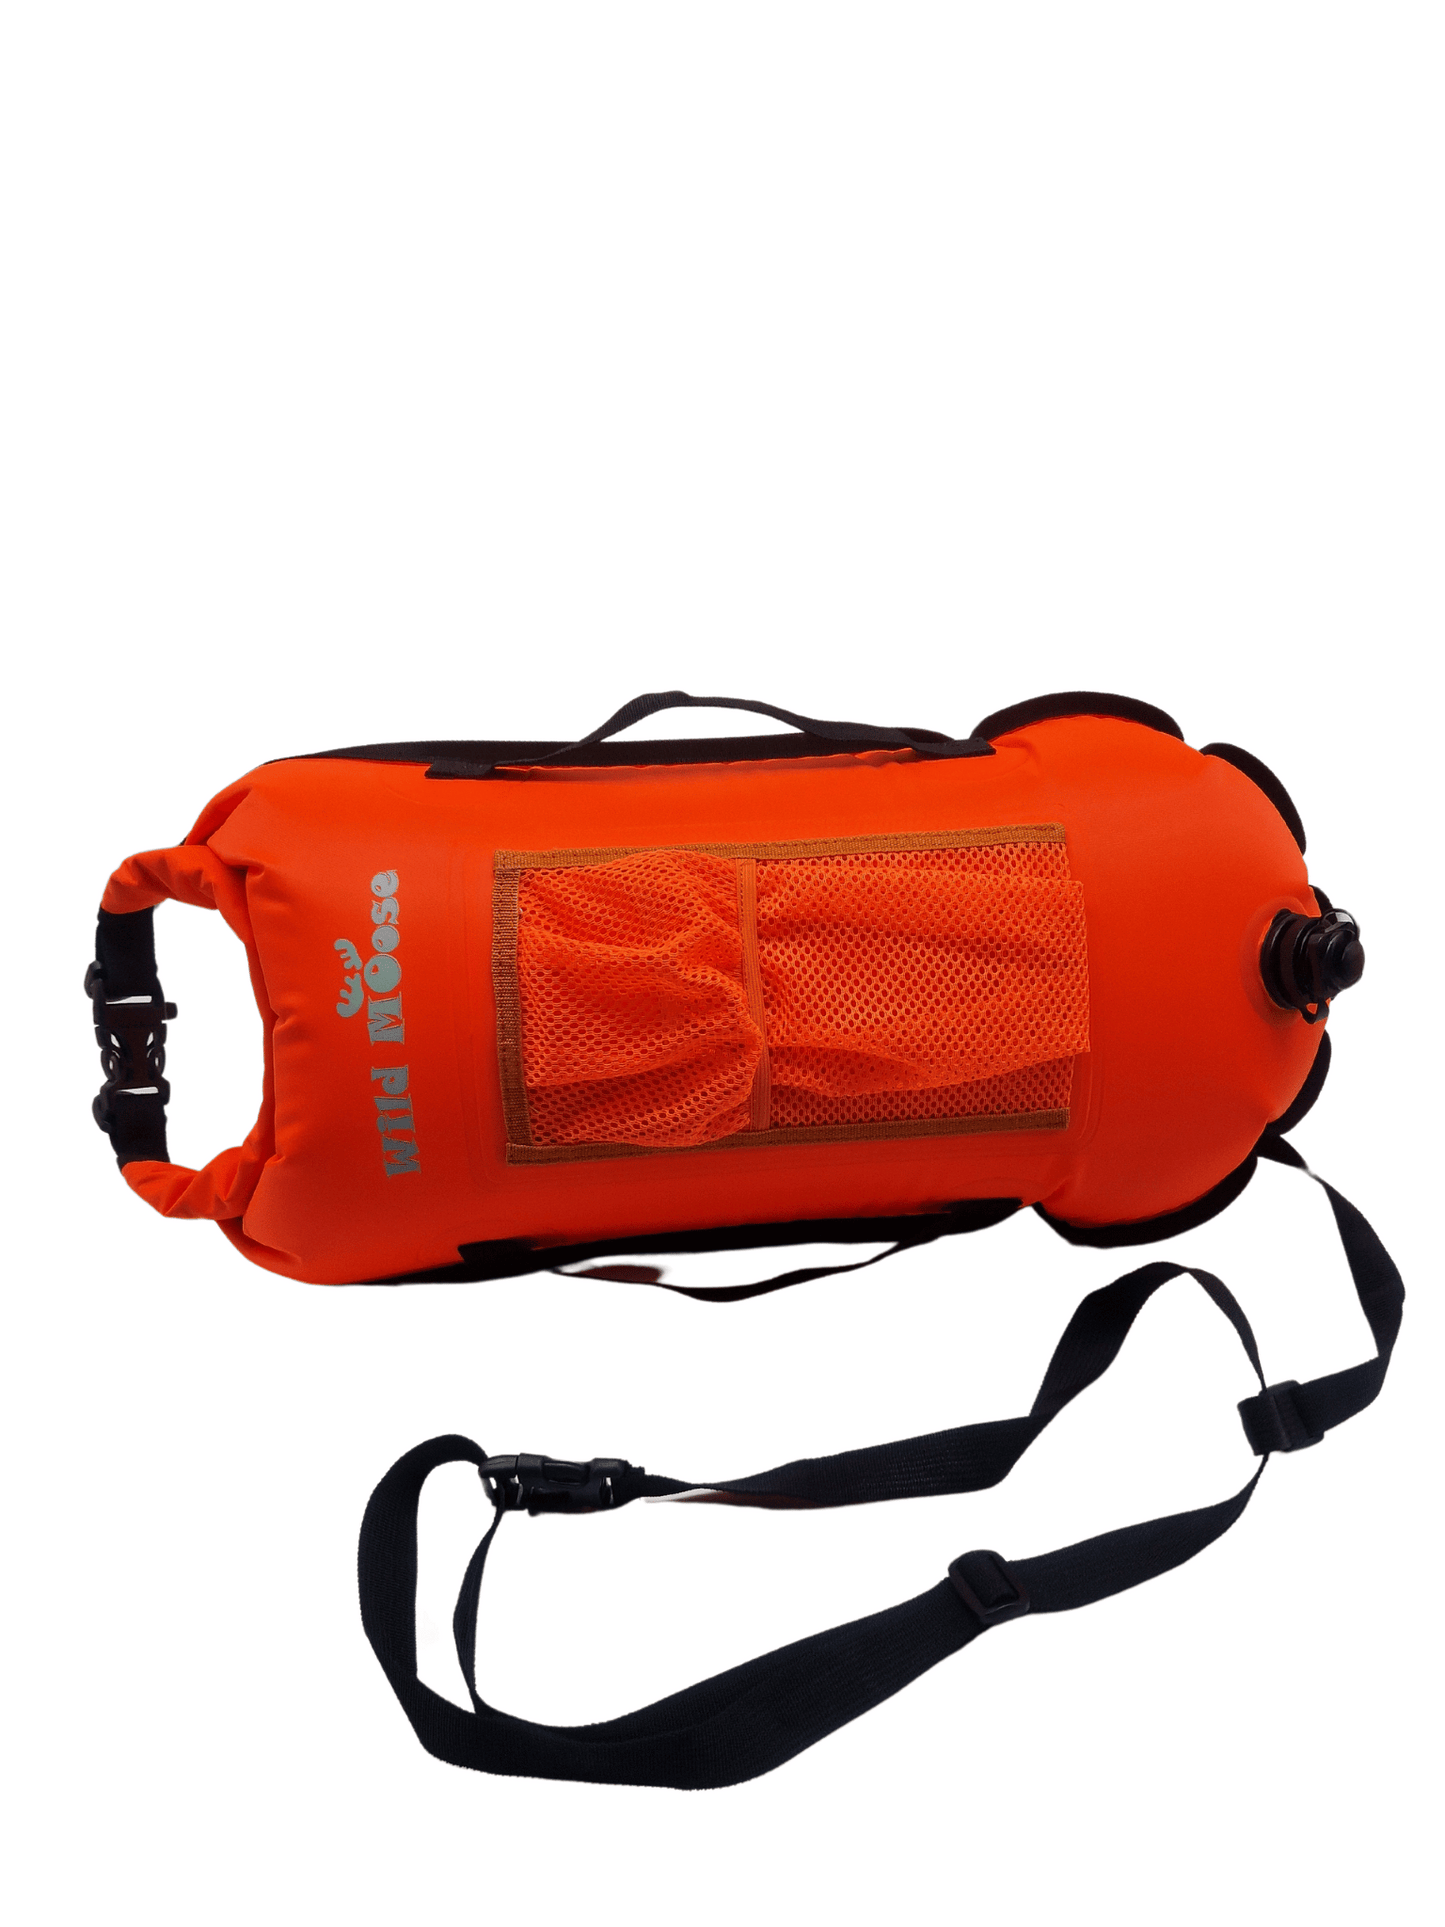 28L bright orange tow float (on side) with mesh top pocket and black handles and leash